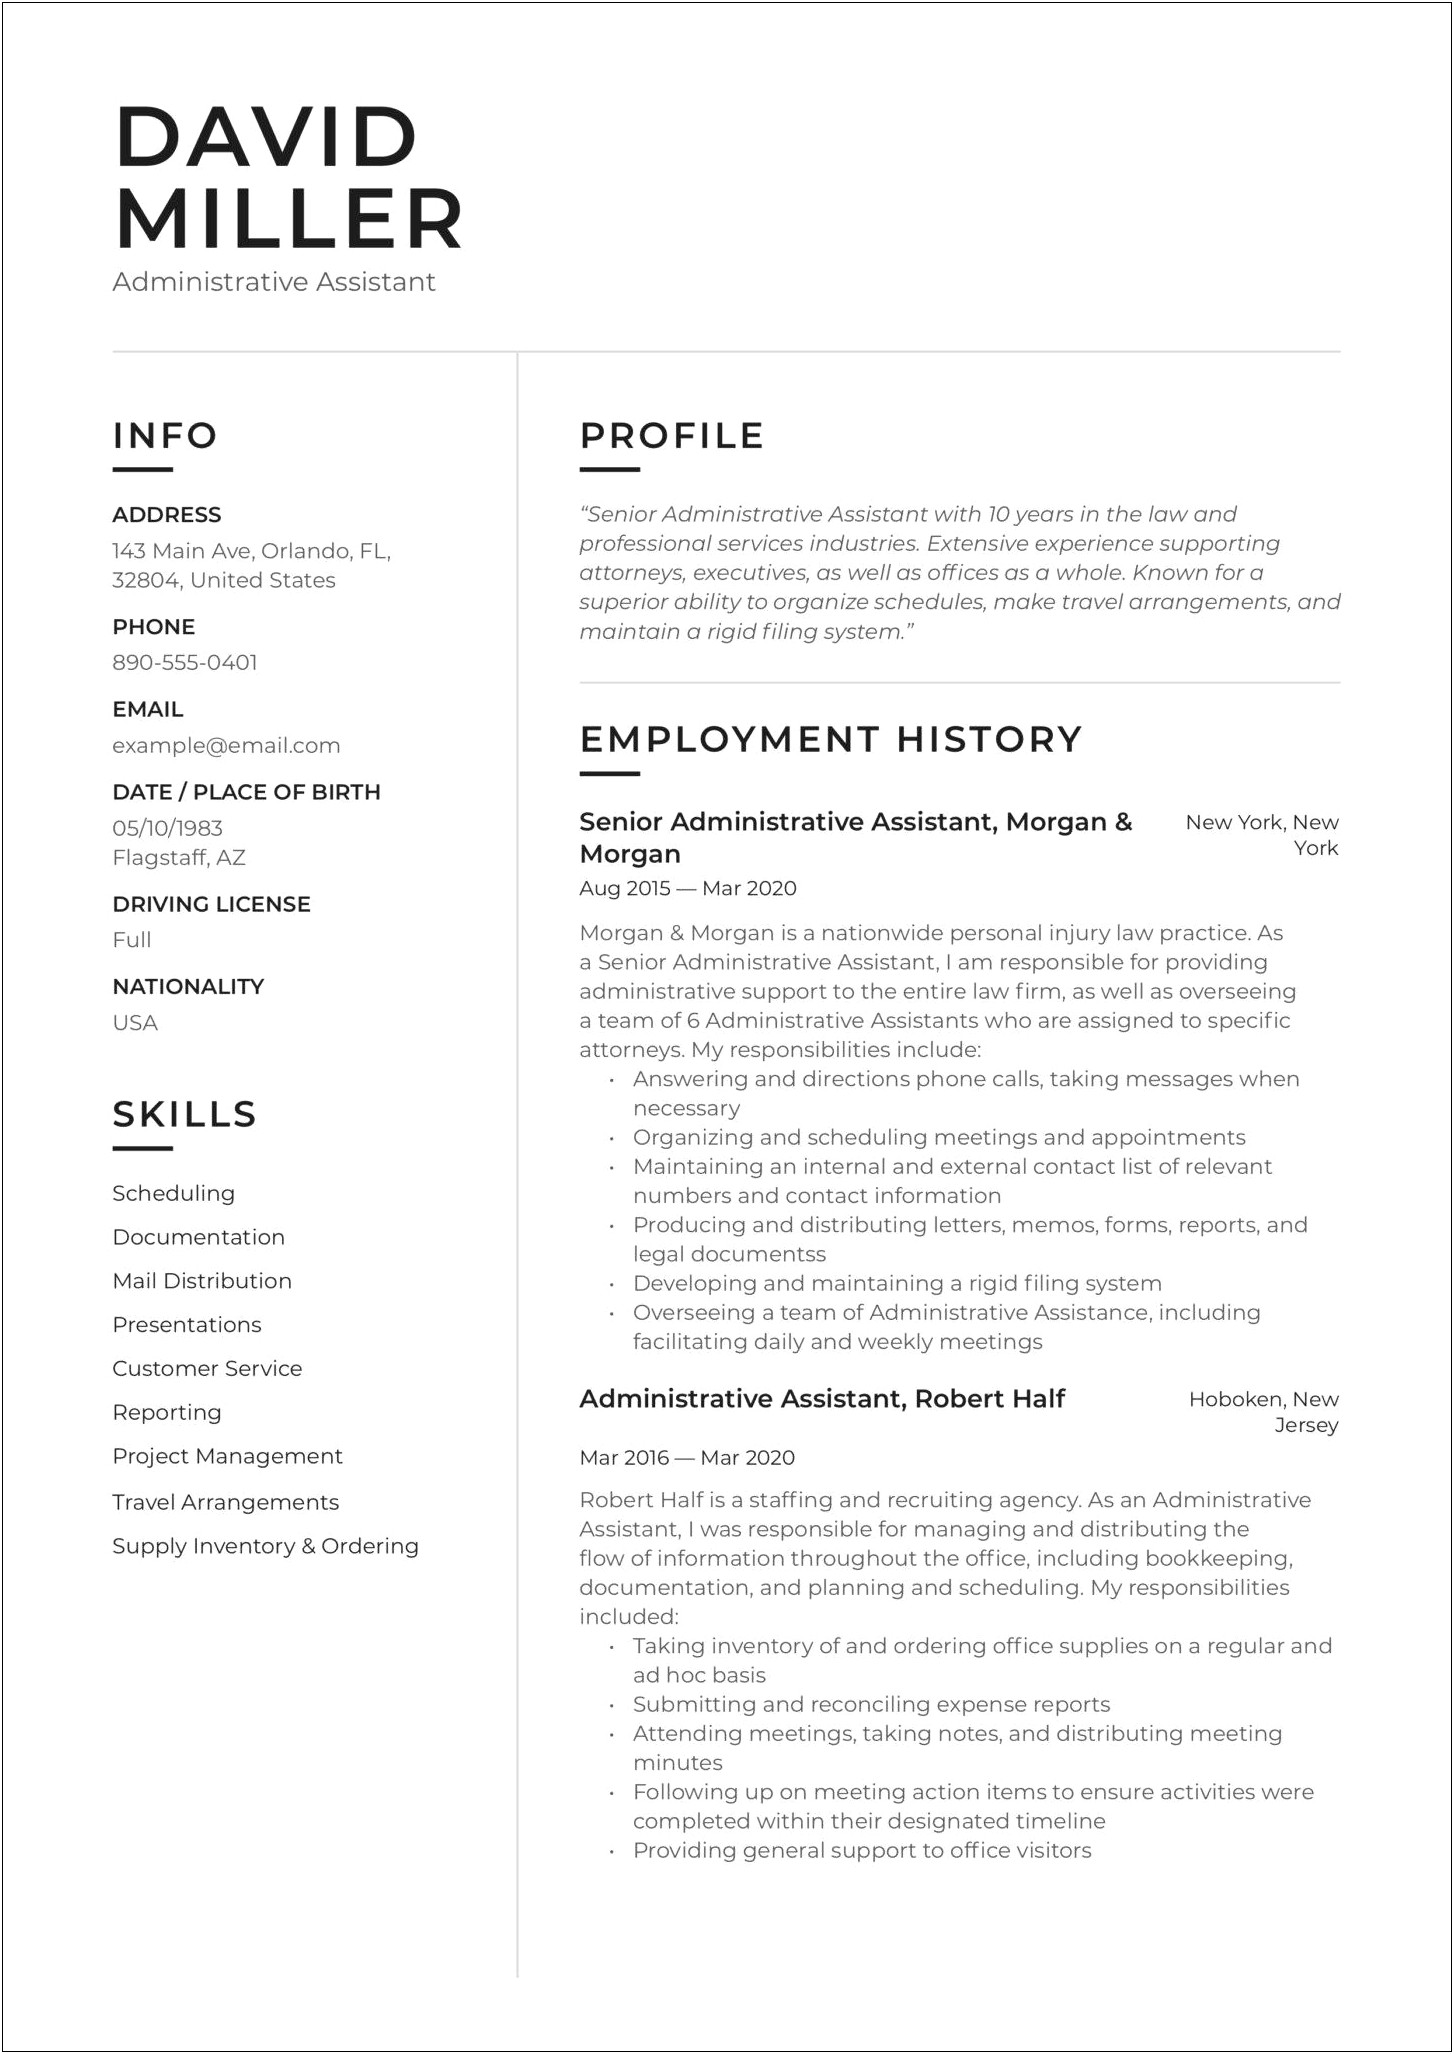 Skill Set For Administrative Assistant For Resume